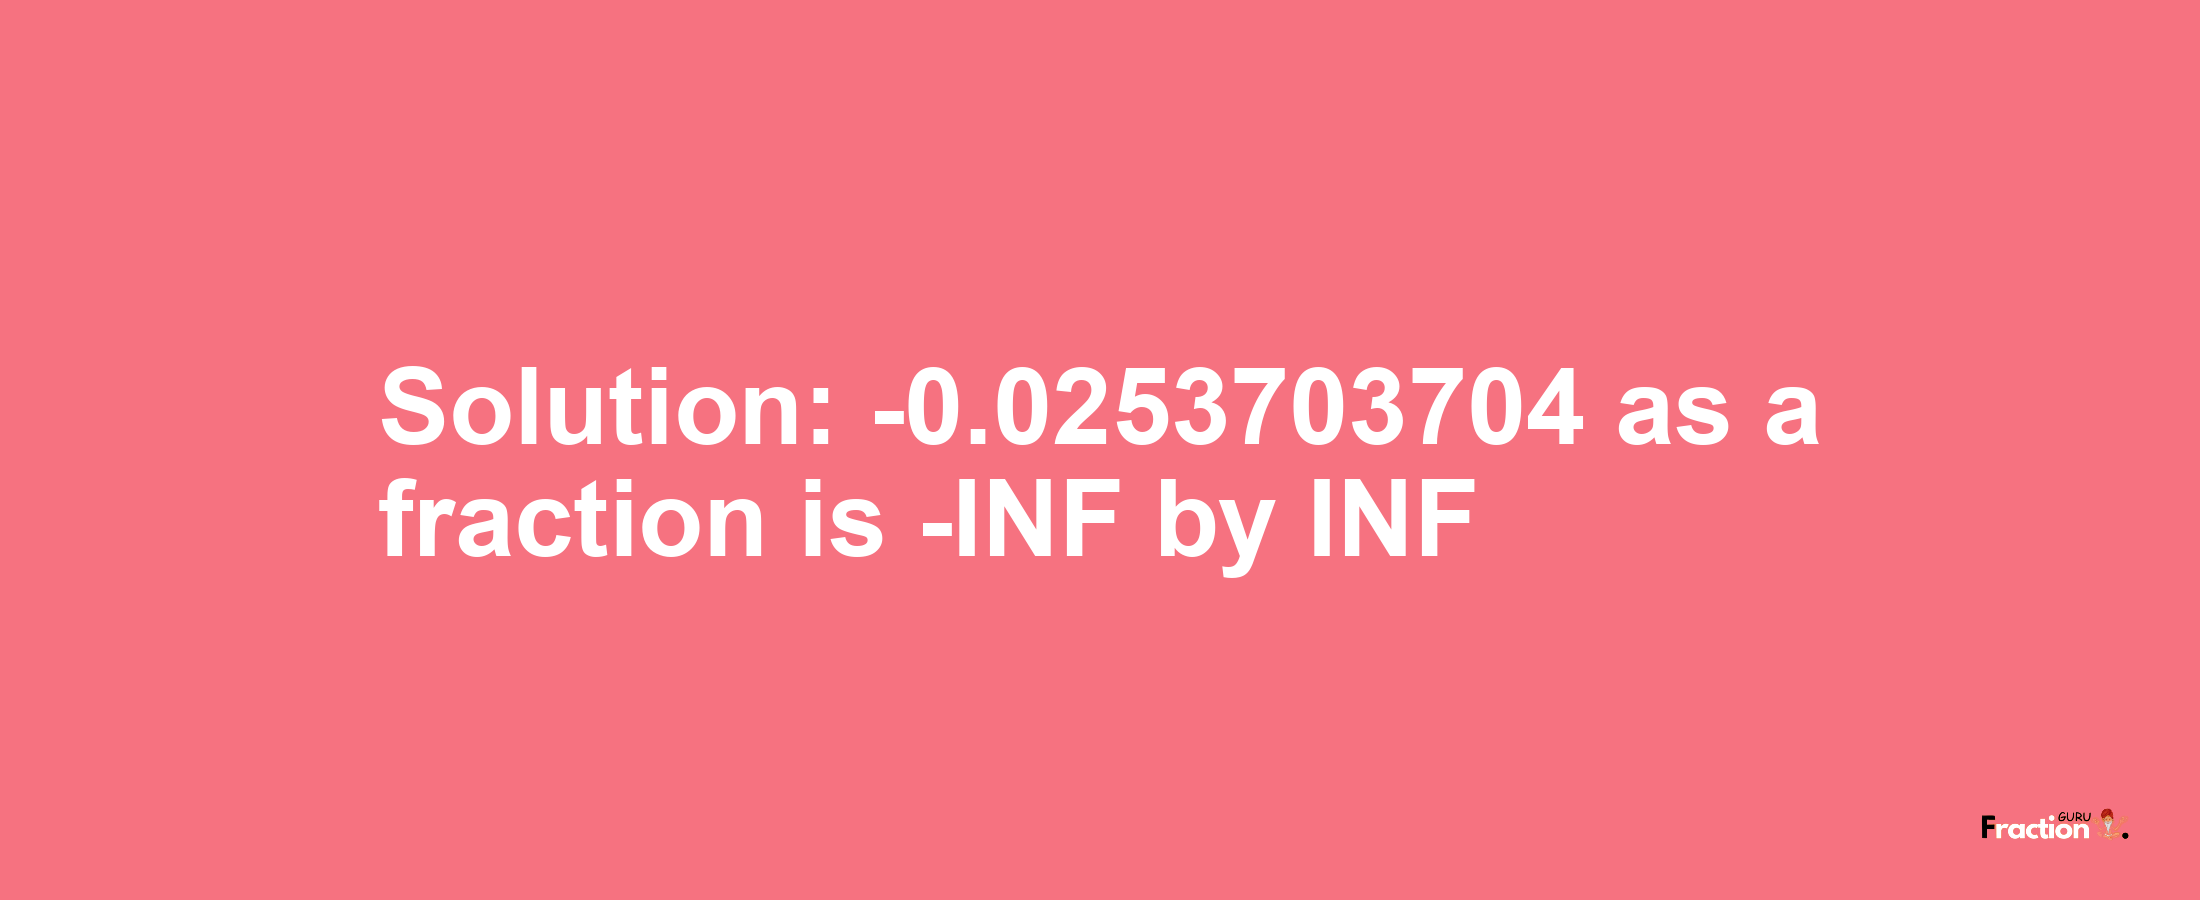 Solution:-0.0253703704 as a fraction is -INF/INF